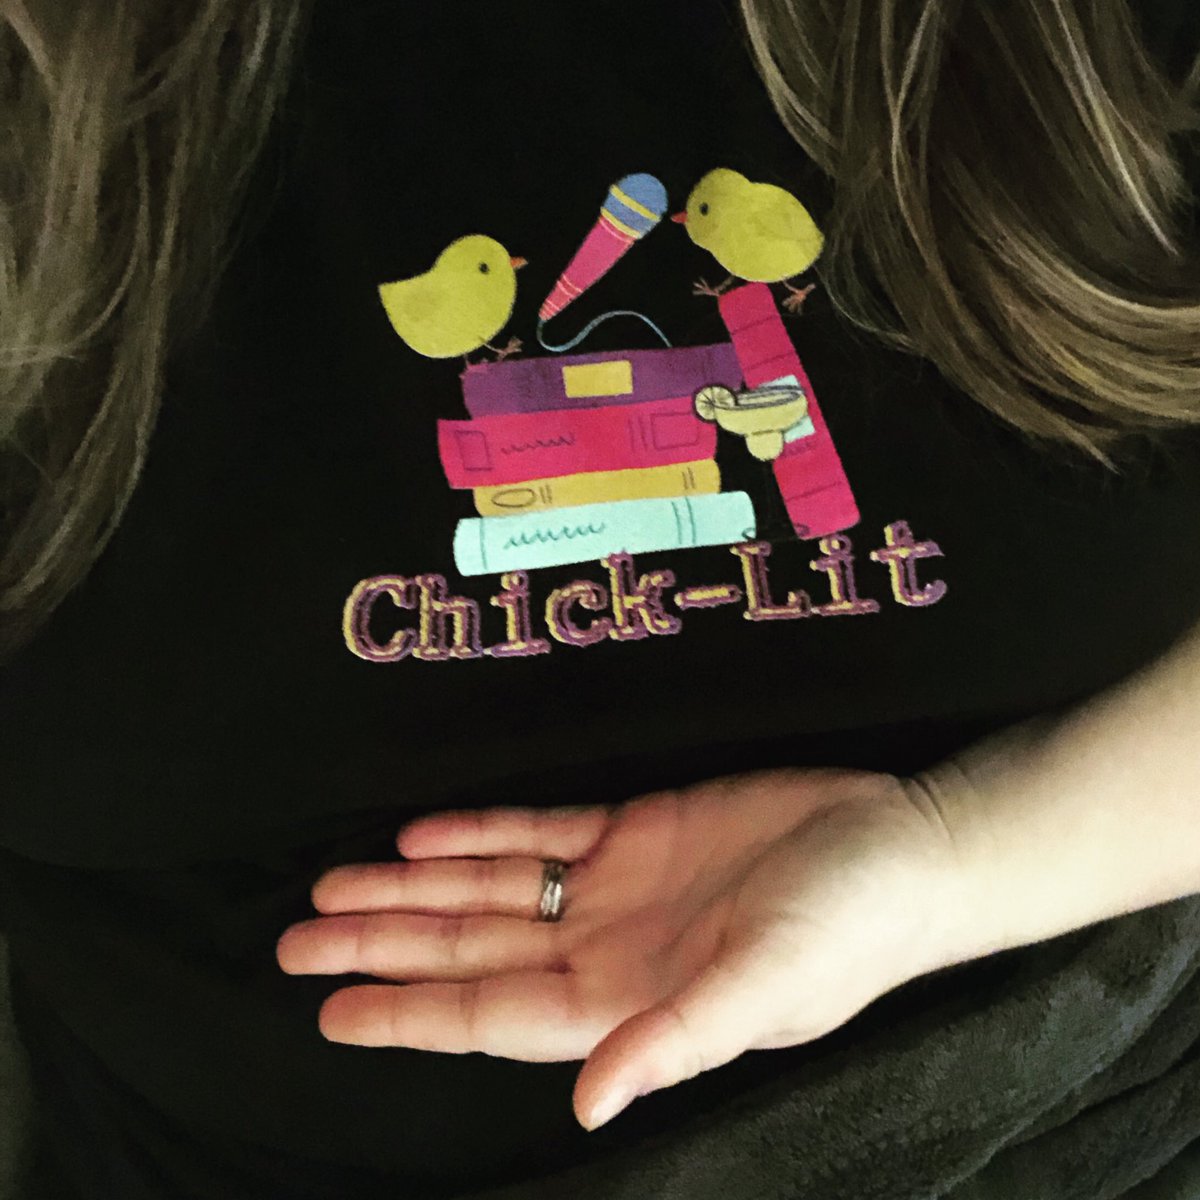 Reminder that we have MERCH! We are now featuring drinkware as well! Check out our apparel and other items.

chick-lit-podcast.creator-spring.com

#podcastmerch #podcastersofinstagram #swag #tshirts #drinkware #femalepodcasters